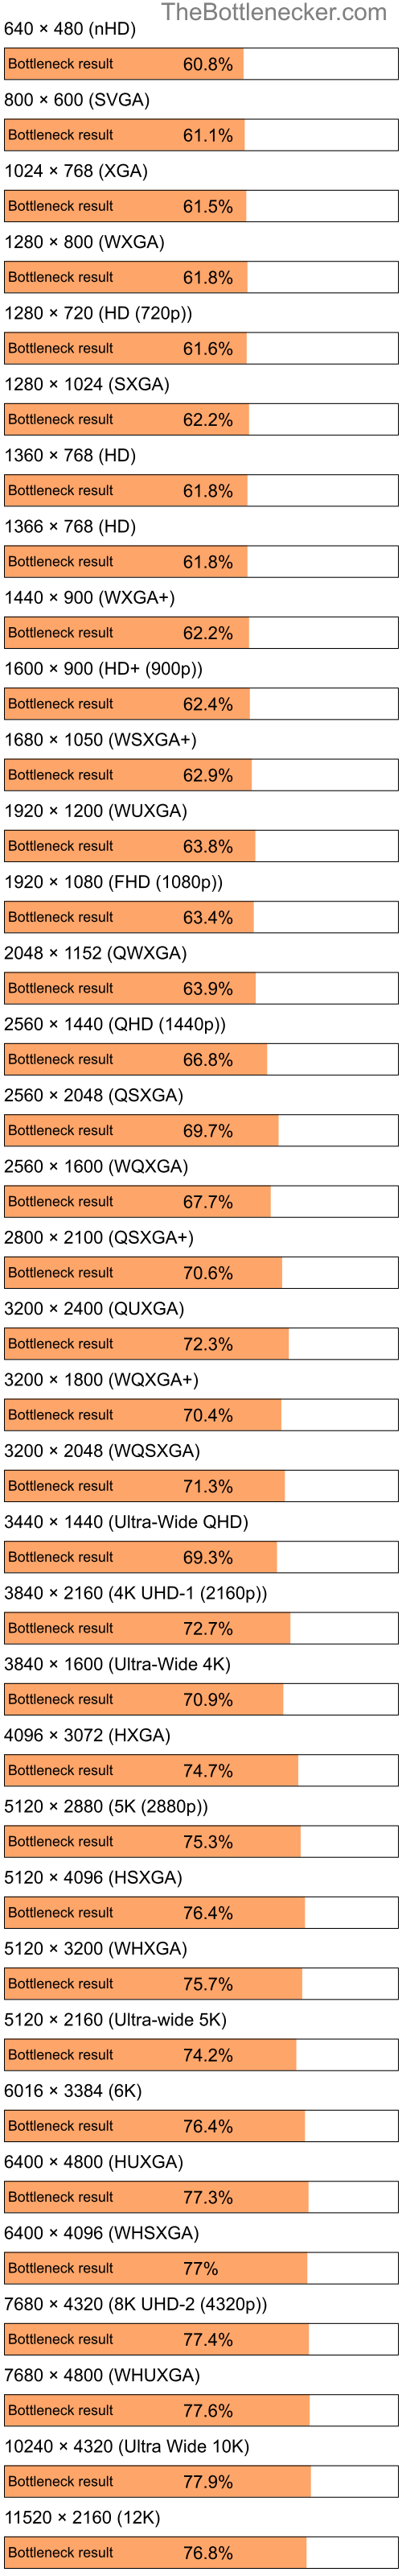 Bottleneck results by resolution for Intel Pentium 4 and Intel G45 in General Tasks